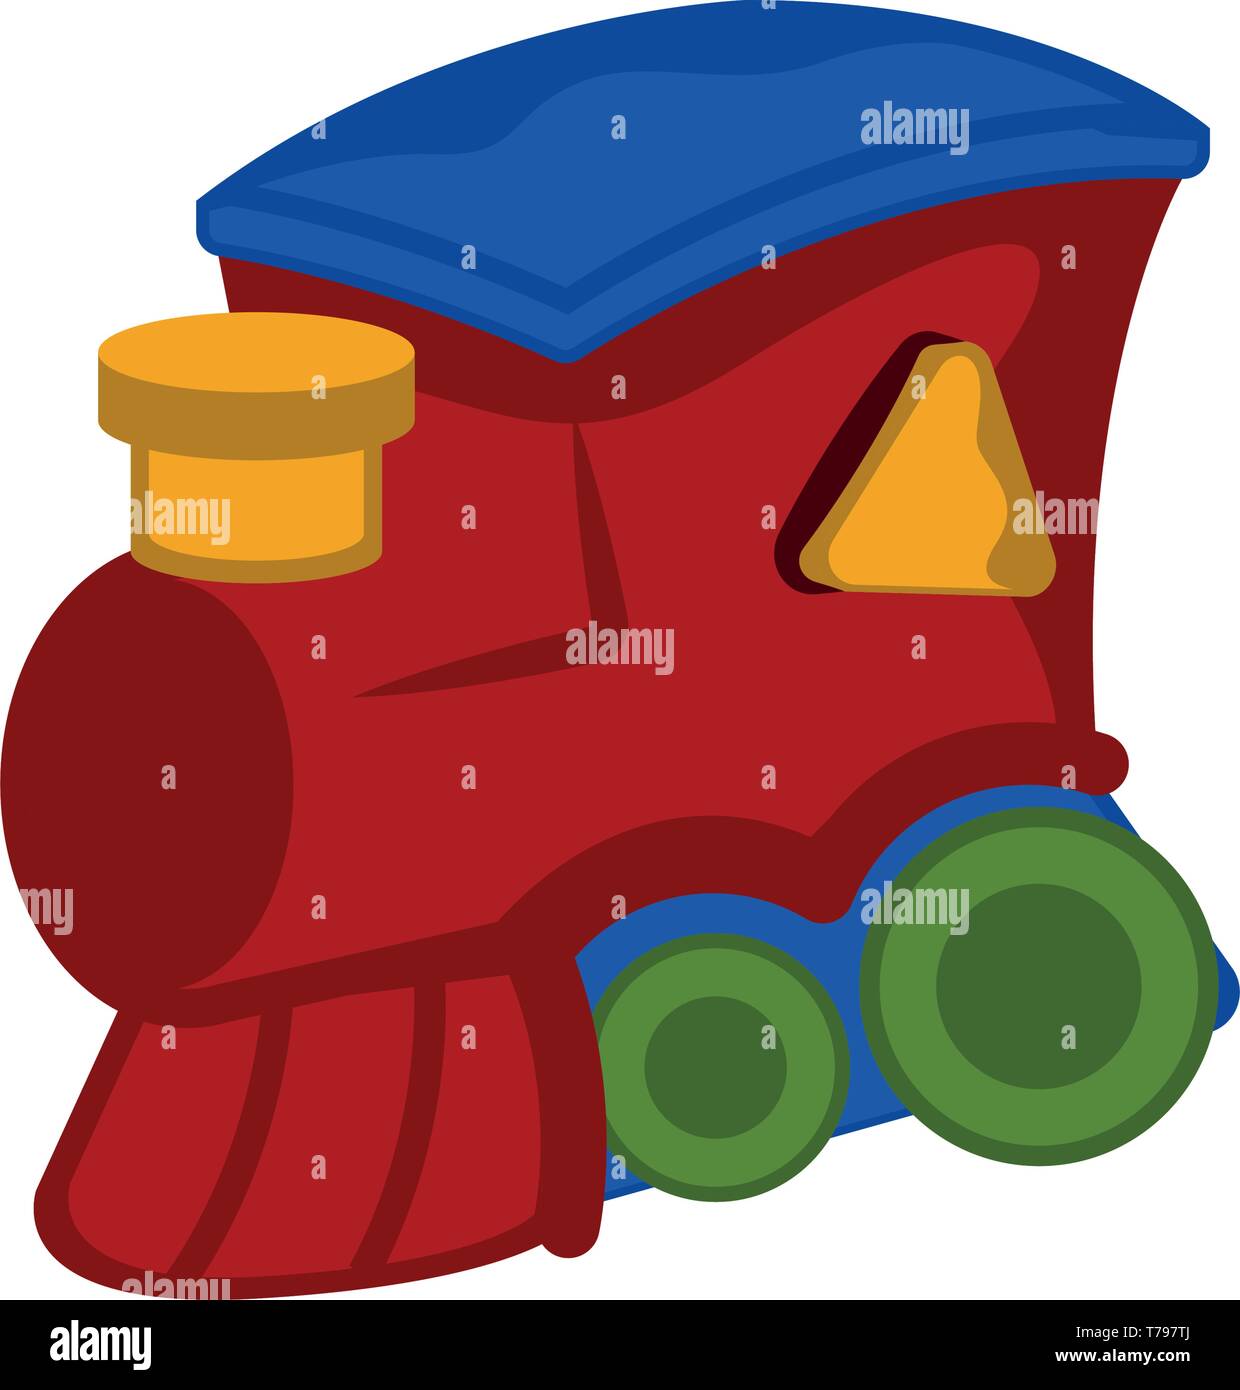 Isolated wooden train toy cartoon image Stock Vector